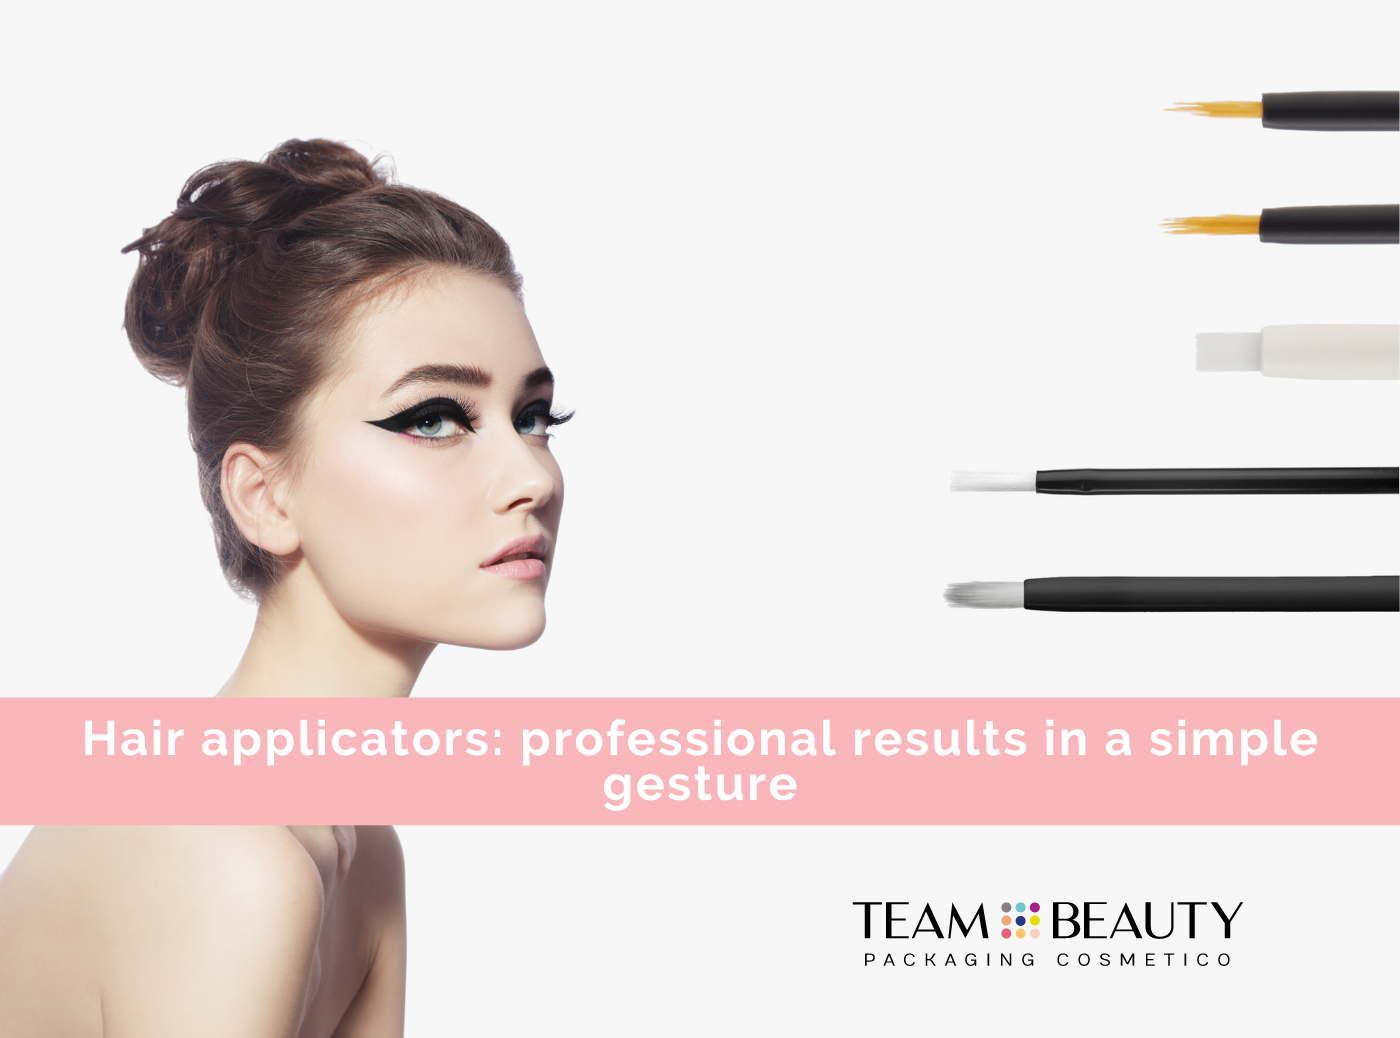 Hair applicators: professional results in a simple gesture